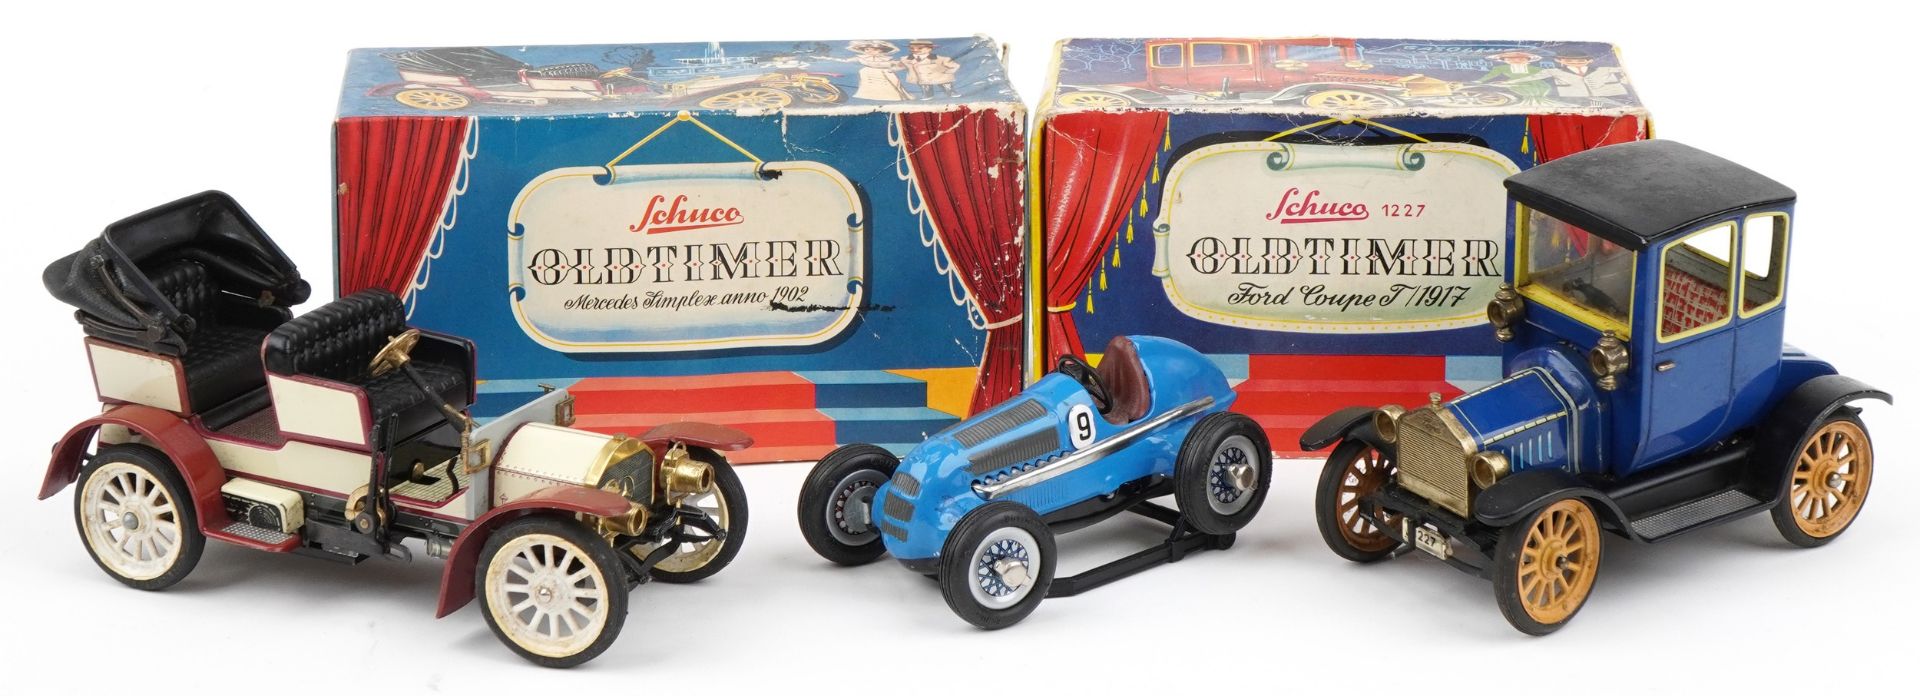 There Schuco tinplate clockwork vehicles, two with boxes, including Ford Coupe and Mercedes Simplex